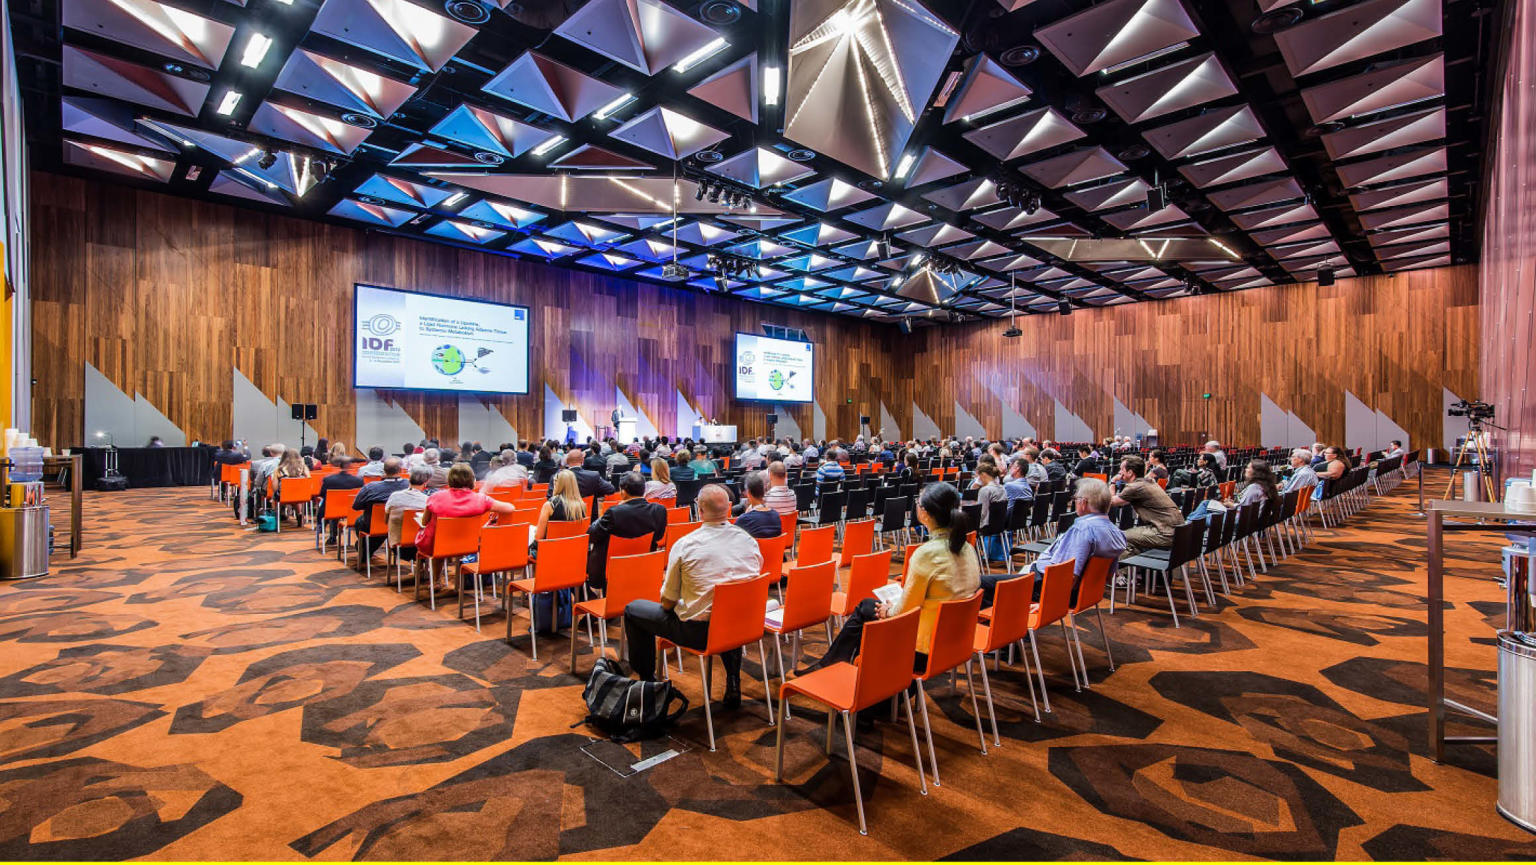 A gathering of individuals seated in neatly arranged rows of vibrant orange chairs, facing two prominent digital screens positioned at the front of the room. The walls exhibit a warm wooden texture, complemented by a patterned carpet.